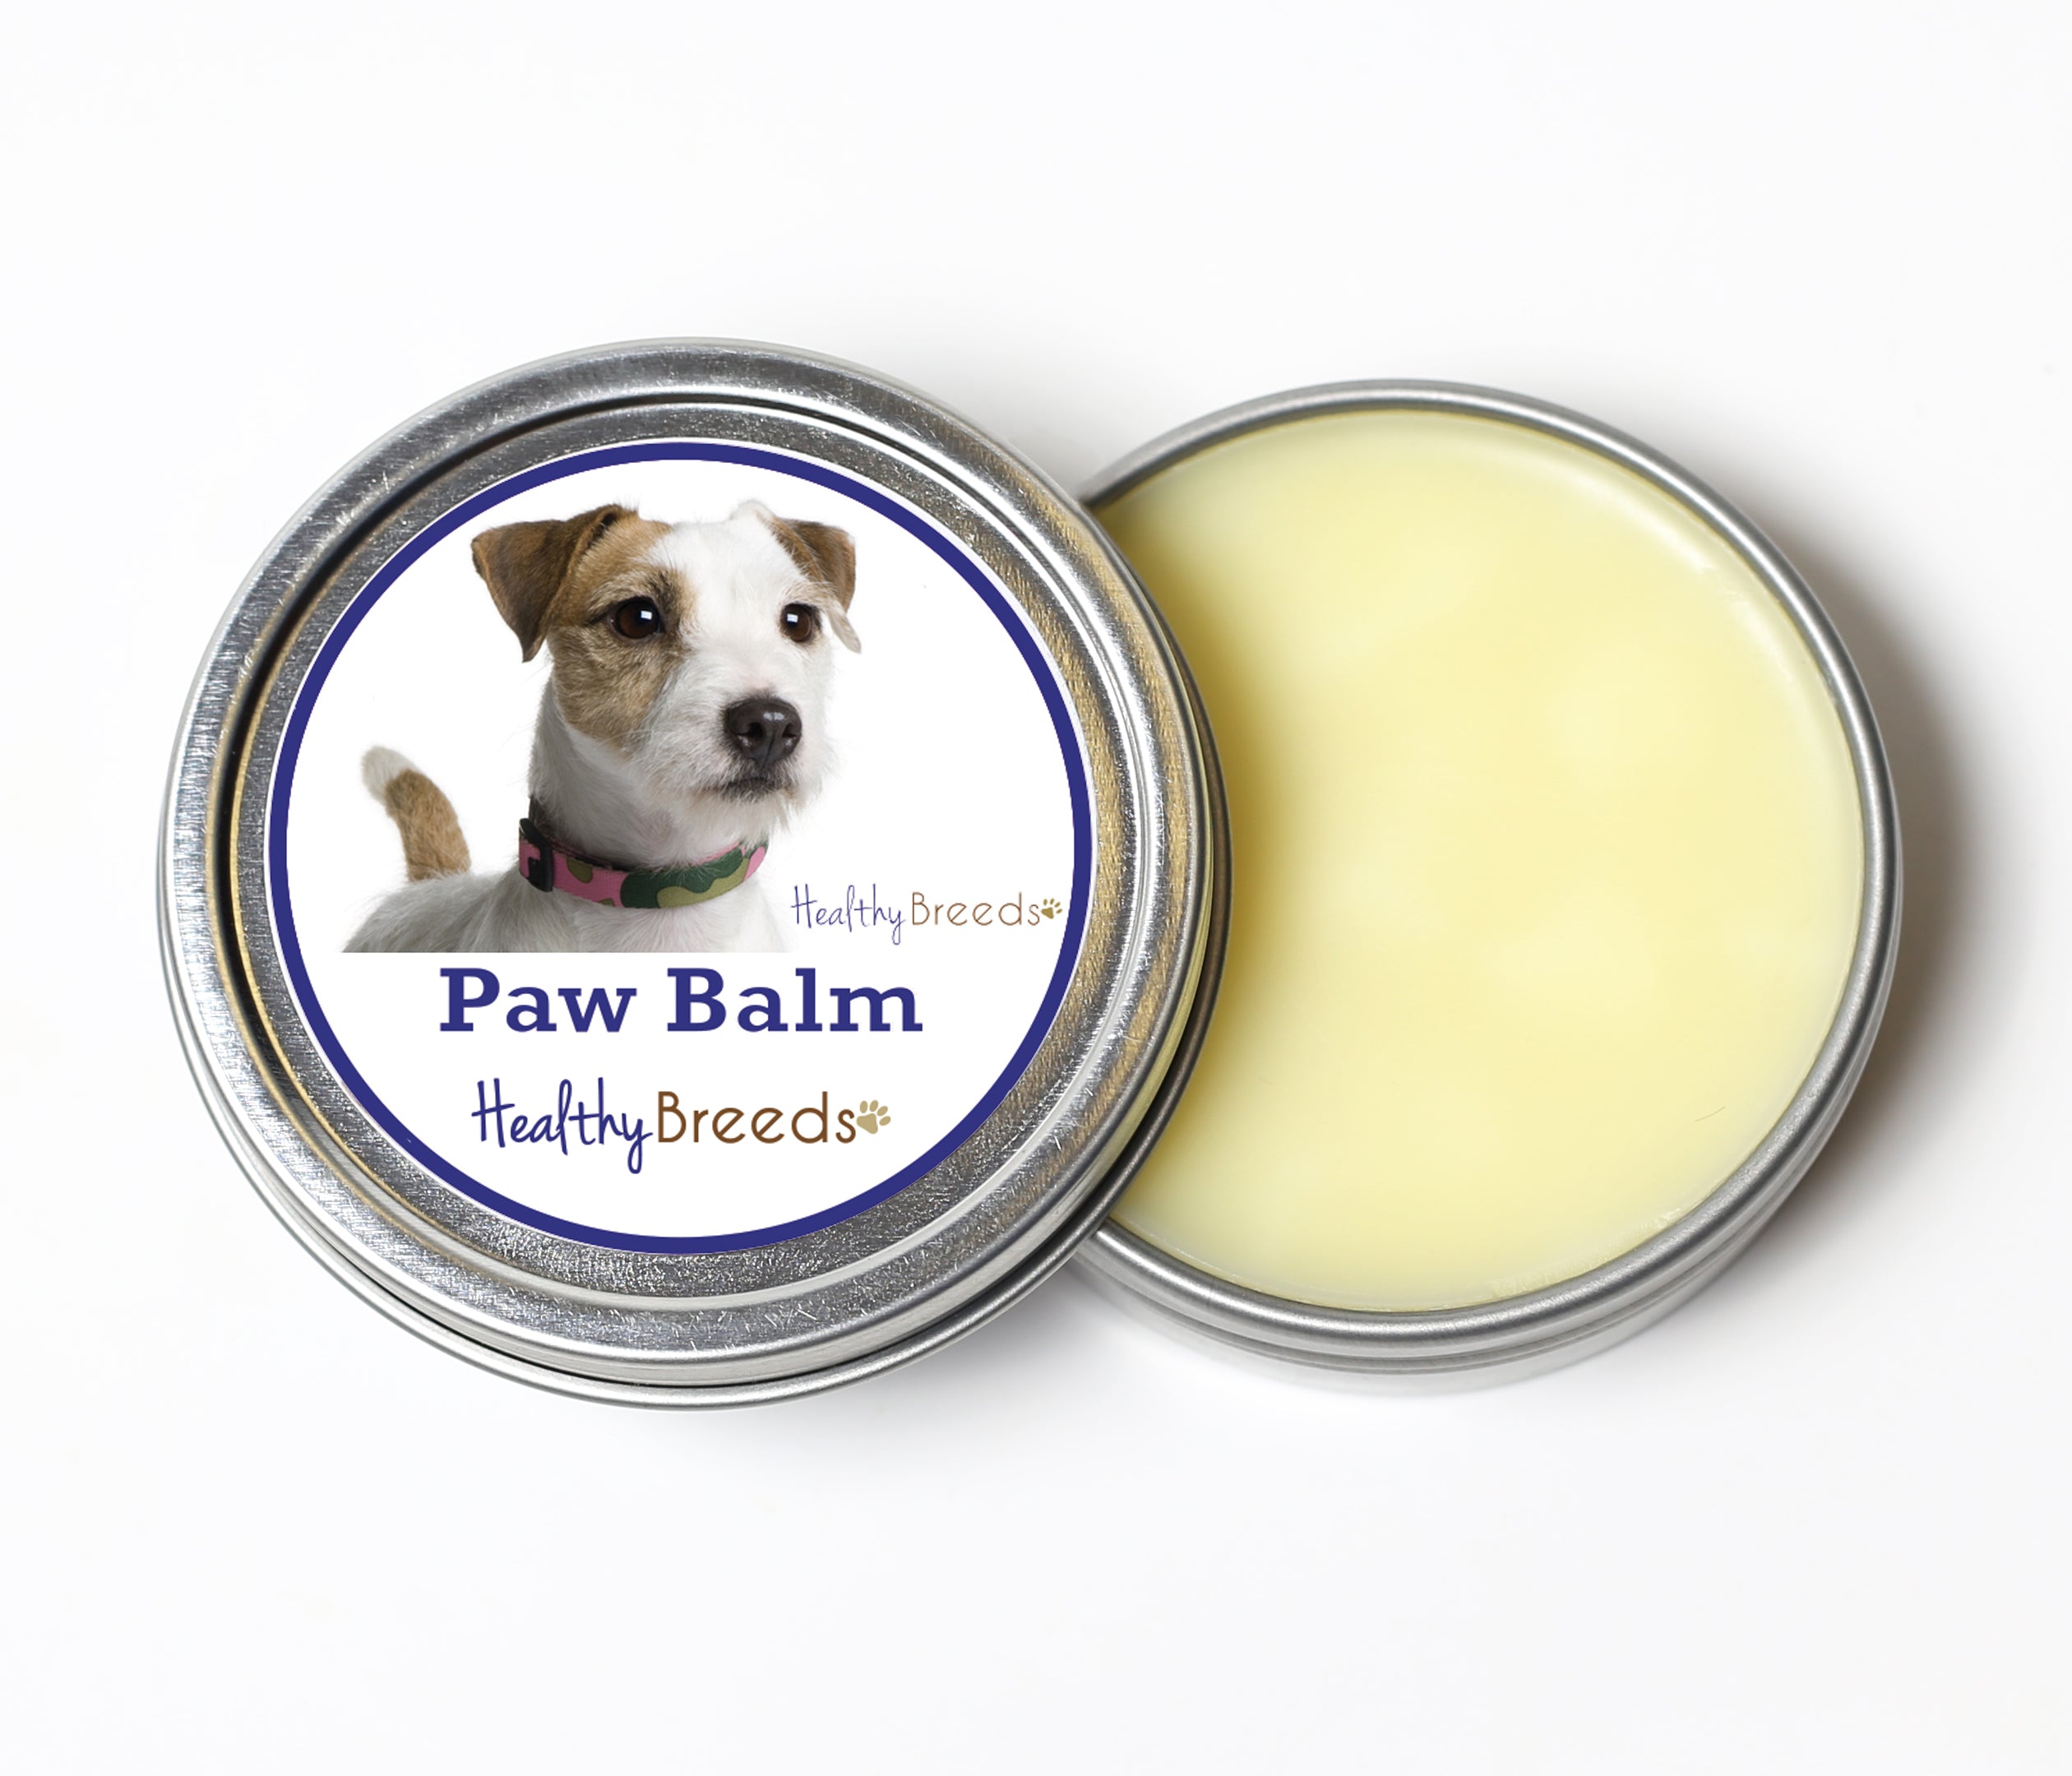 Parson Russell Terrier Dog Paw Balm 2 oz